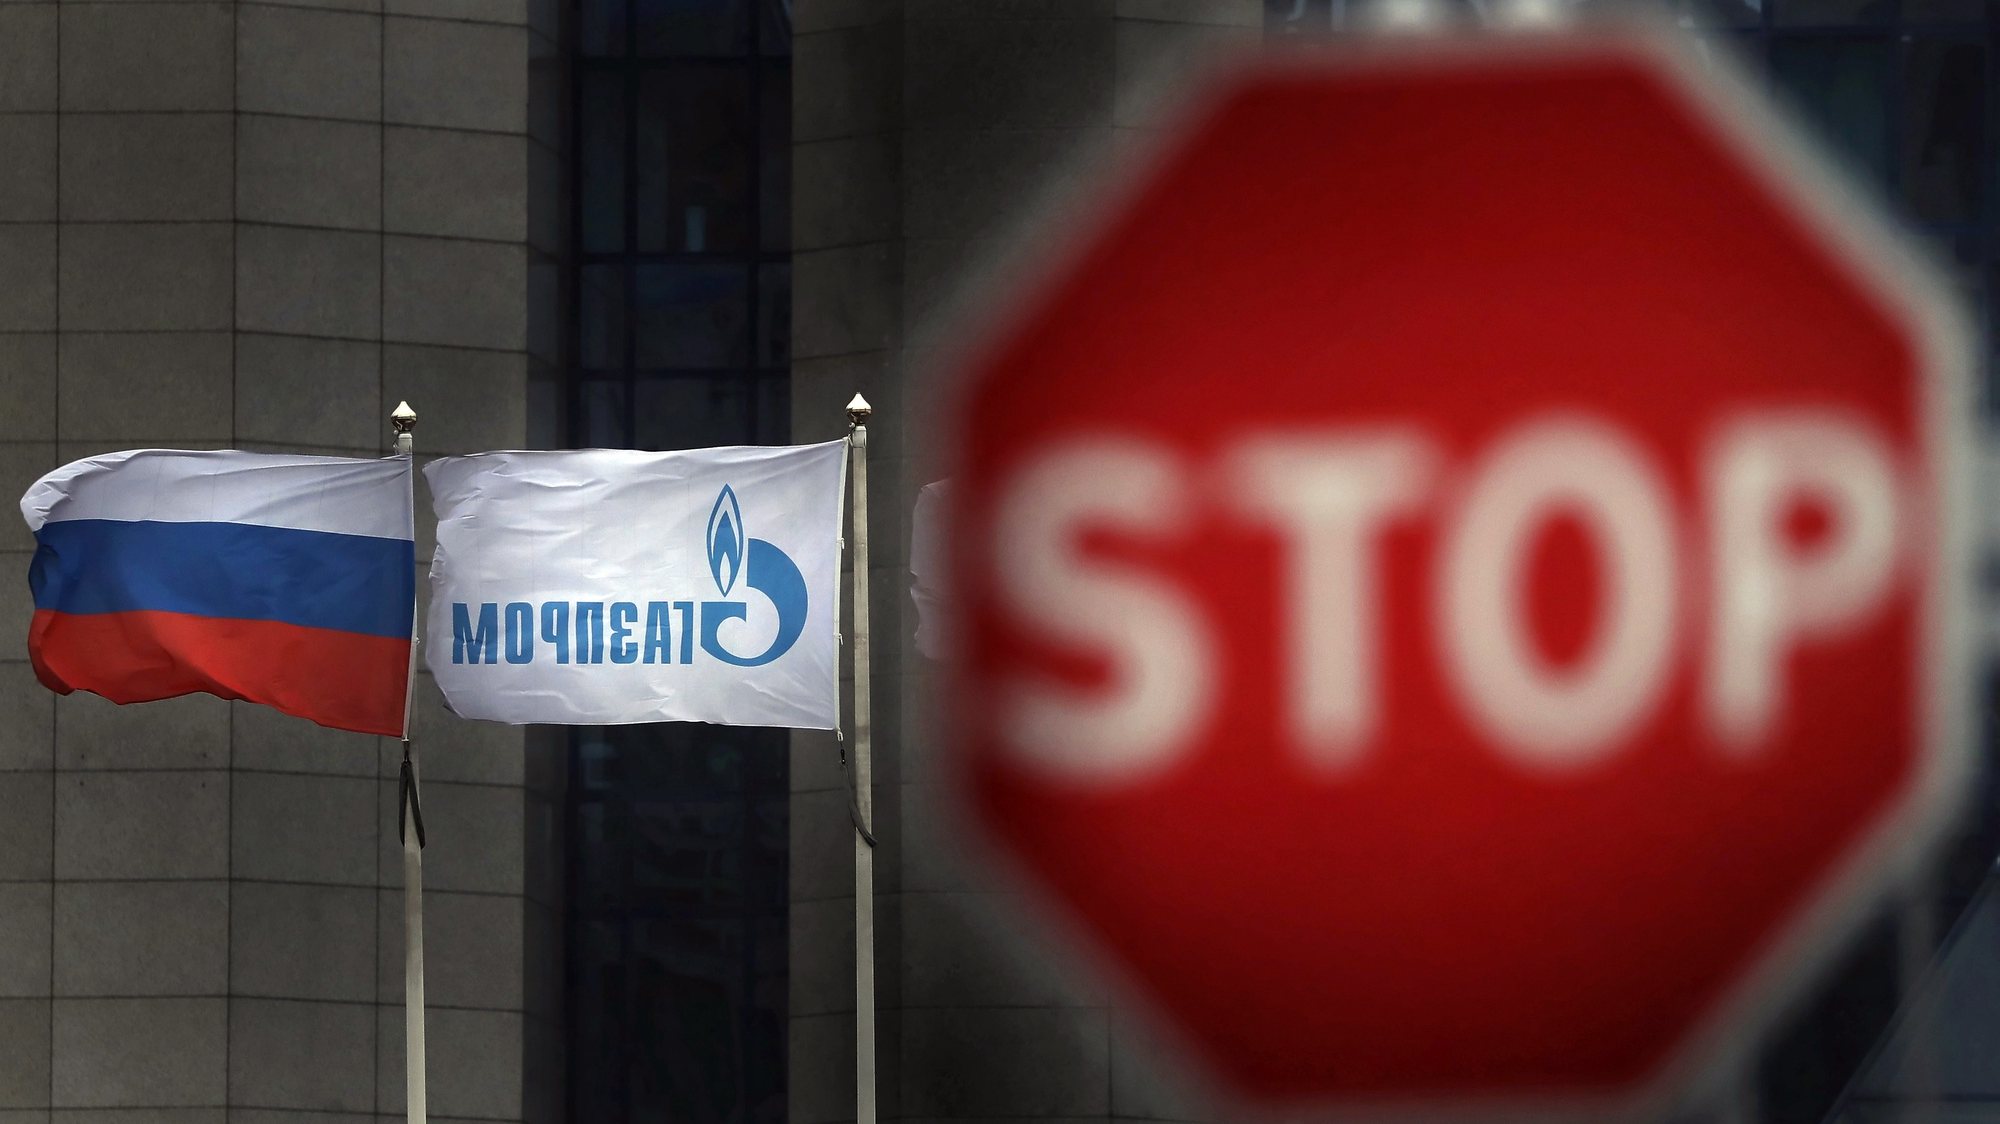 epa08147767 Flags wave outside of the Russian Gazprom company&#039;s headquarters in Moscow, Russia, 21 January 2020. According to Gazprom&#039;s plans, the Nord Stream 2 natural gas pipeline from Russia to Germany should be completed at the beginning of 2021, despite US sanctions against companies laying pipes for the natural gas pipeline.  EPA/MAXIM SHIPENKOV